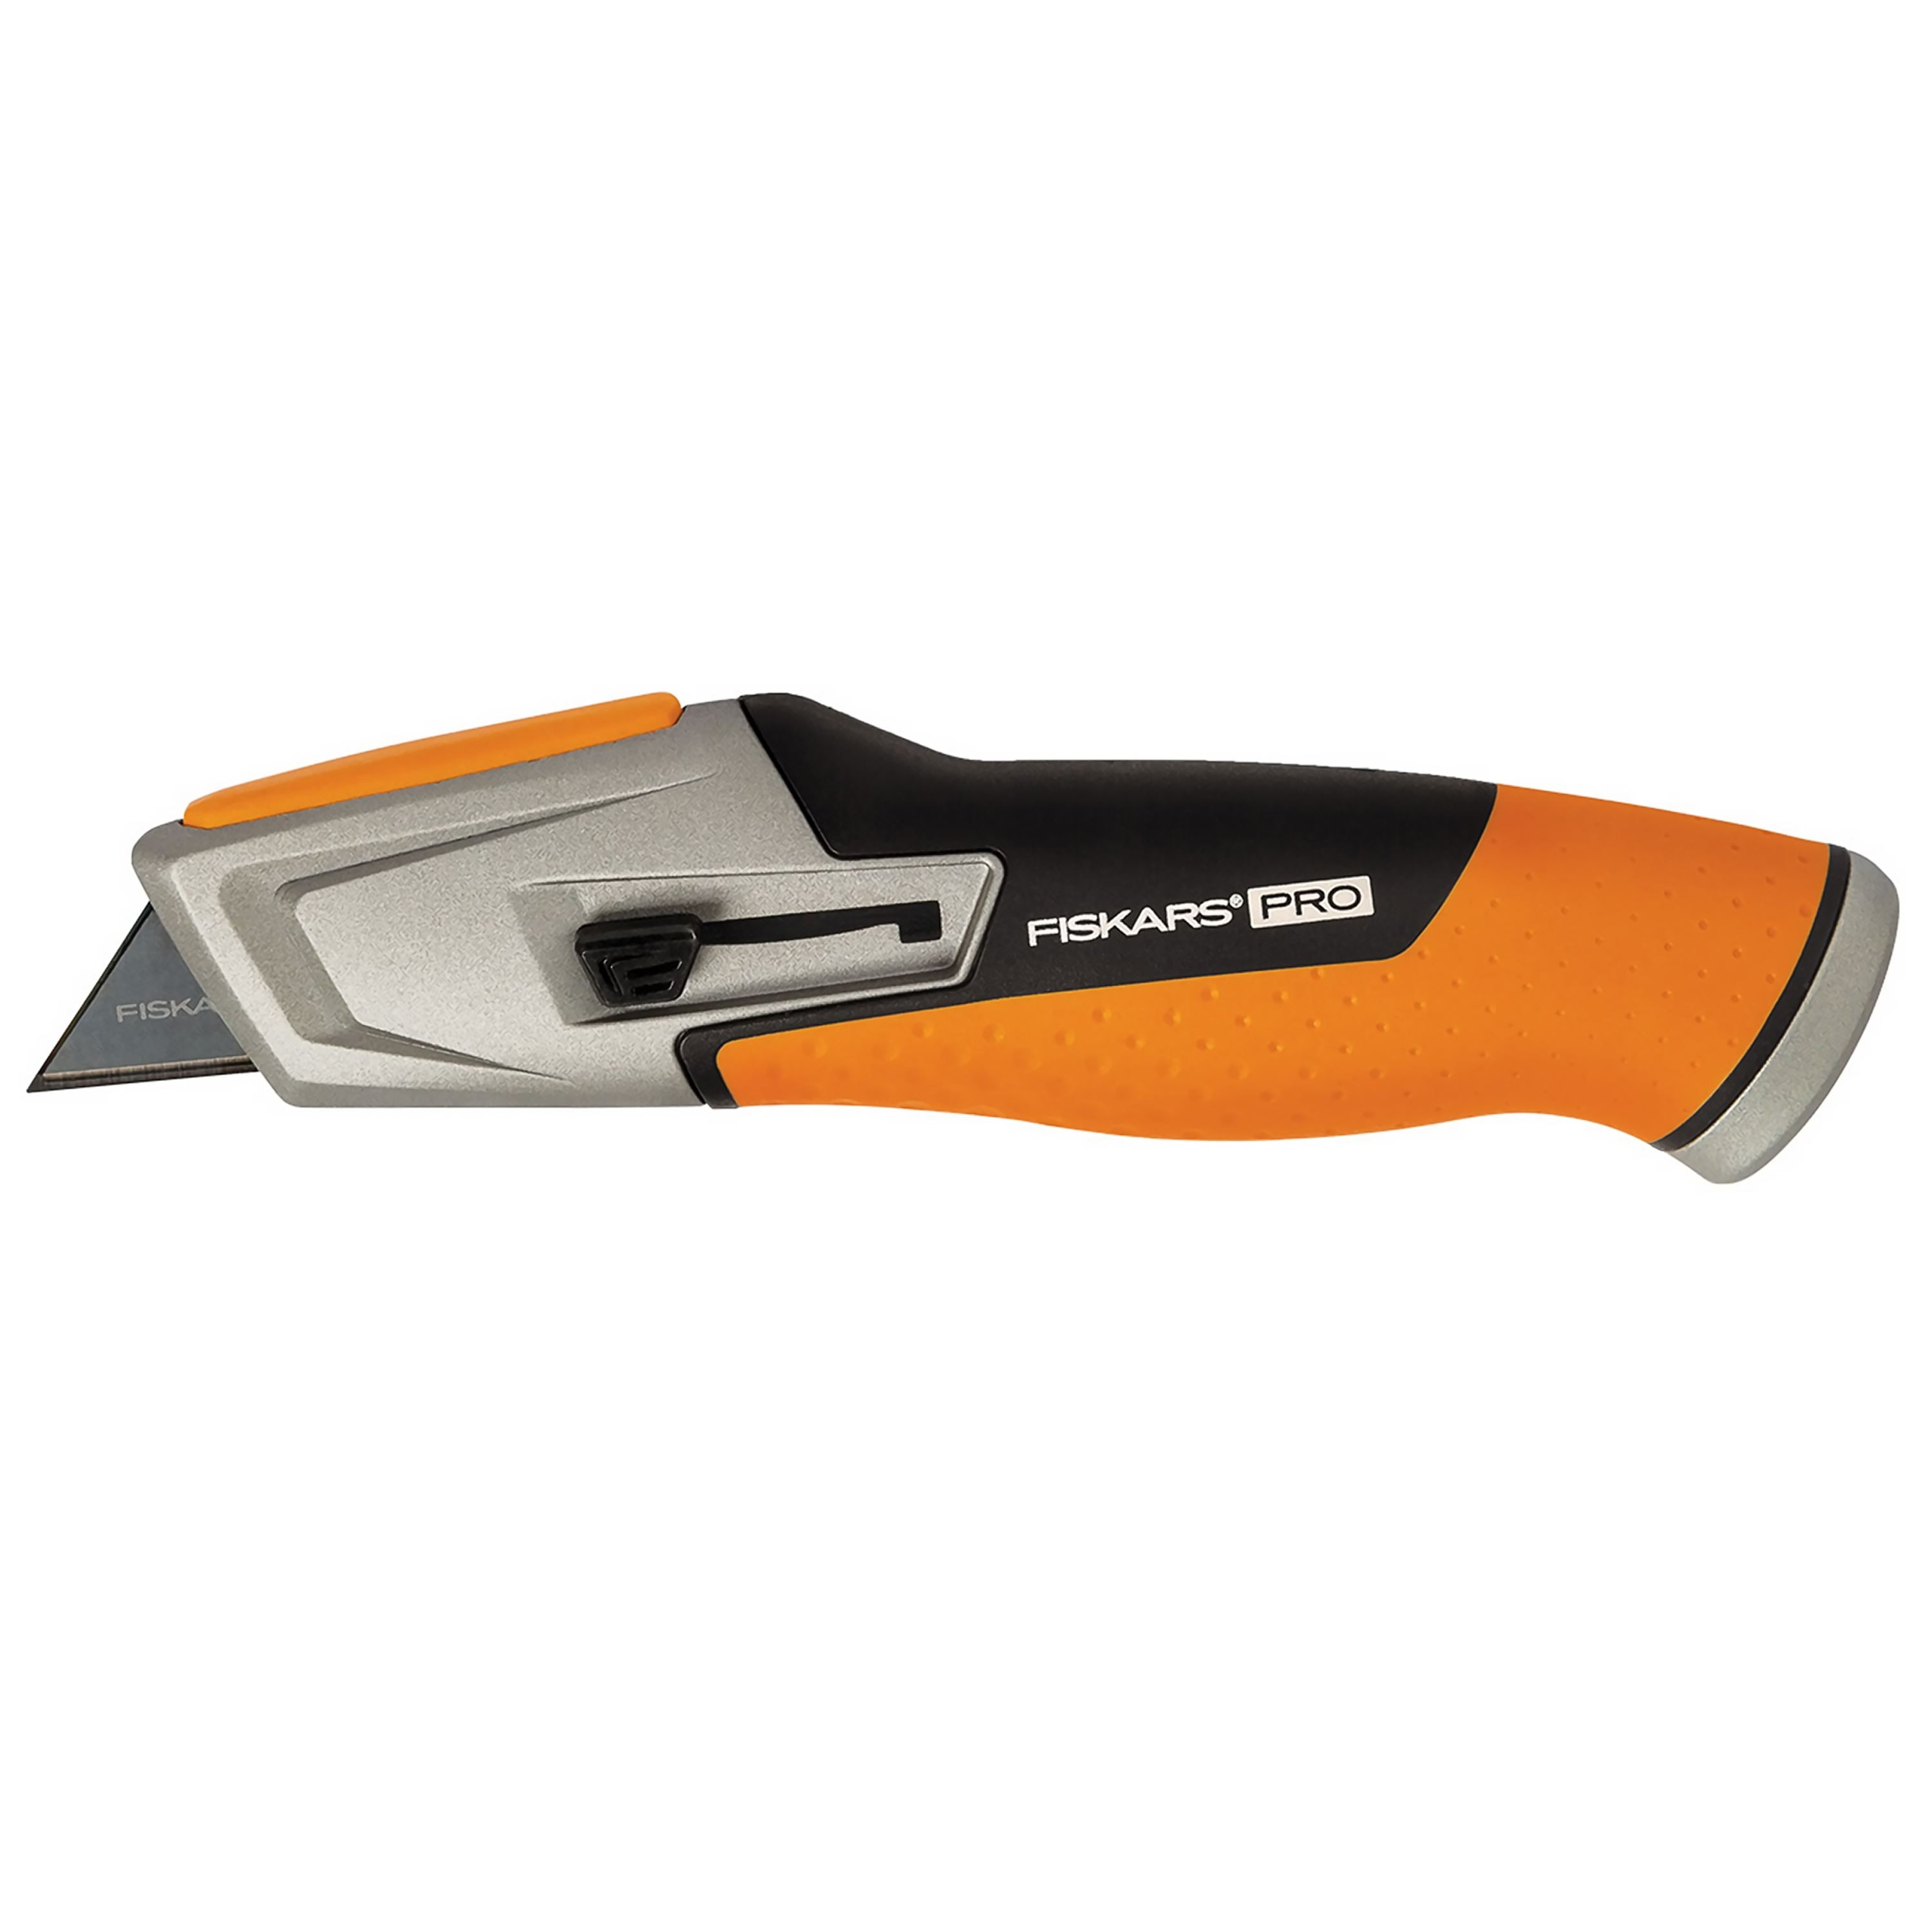 Fiskars - Utility Knives, Snap Blades & Box Cutters; Type: Utility